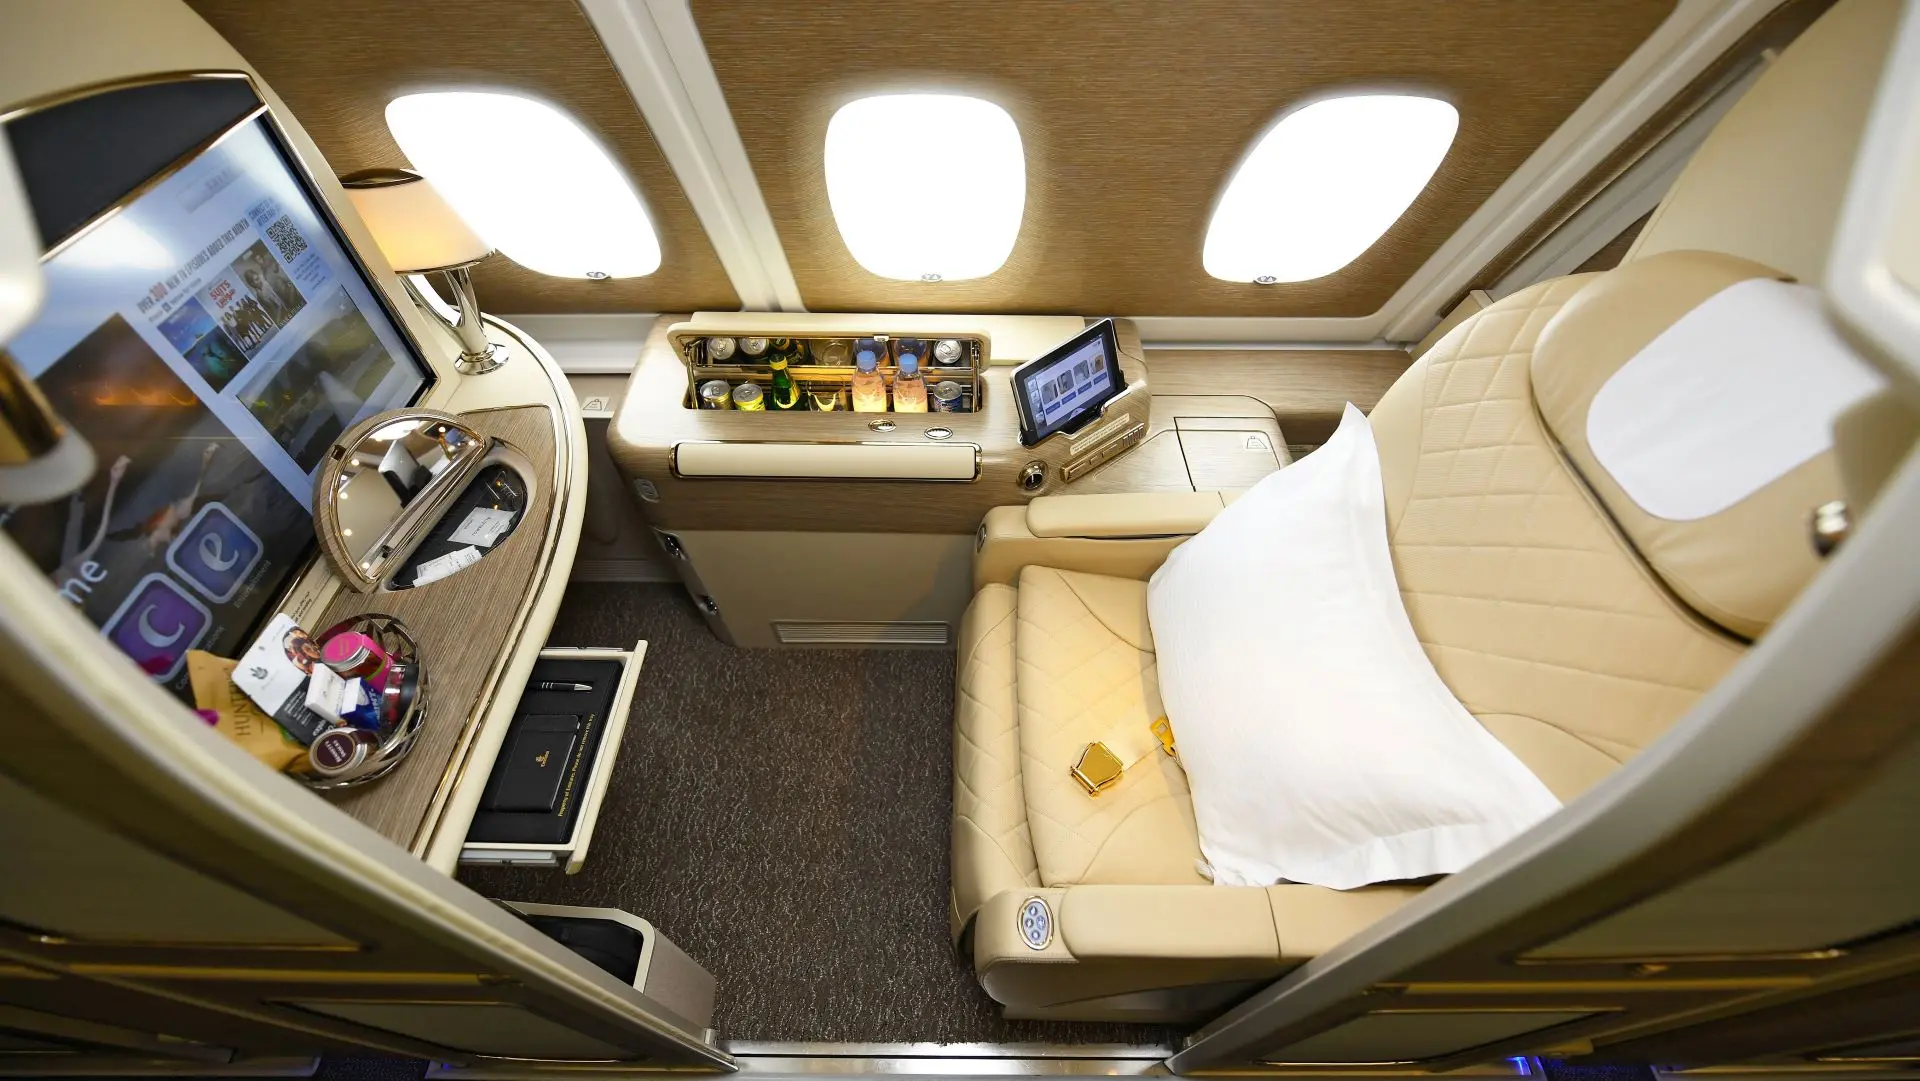 Airlines News - Emirates flies its first refurbished A380 